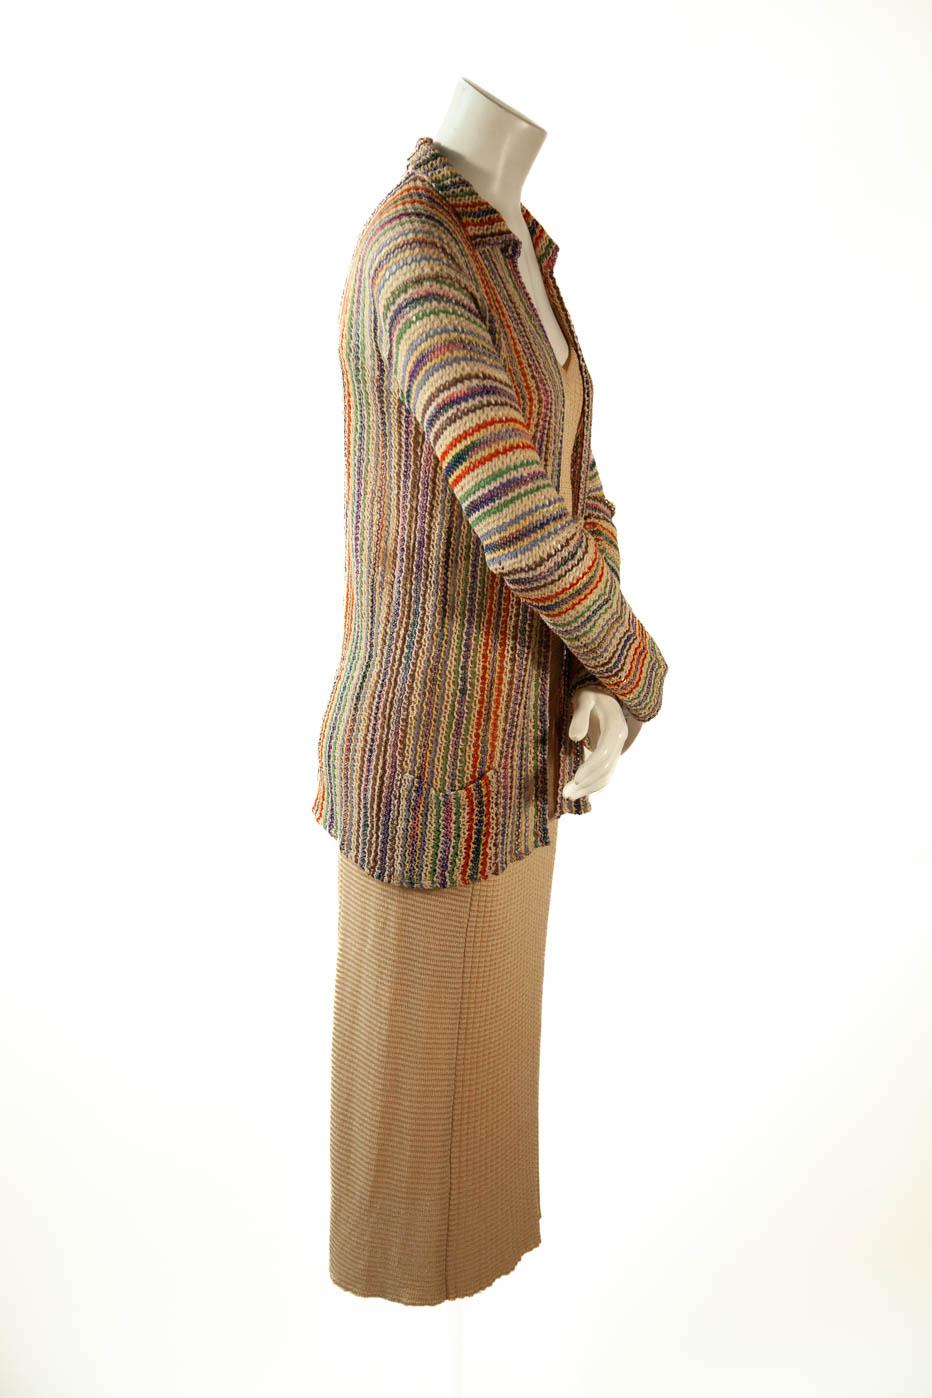 Missoni, circa 1973 (verified), three (3) piece knit ensemble. Ribbed cream v-neck camisole and long skirt with long sleeve multi-color rayon and cotton knit cardigan with patch pockets.

Label 